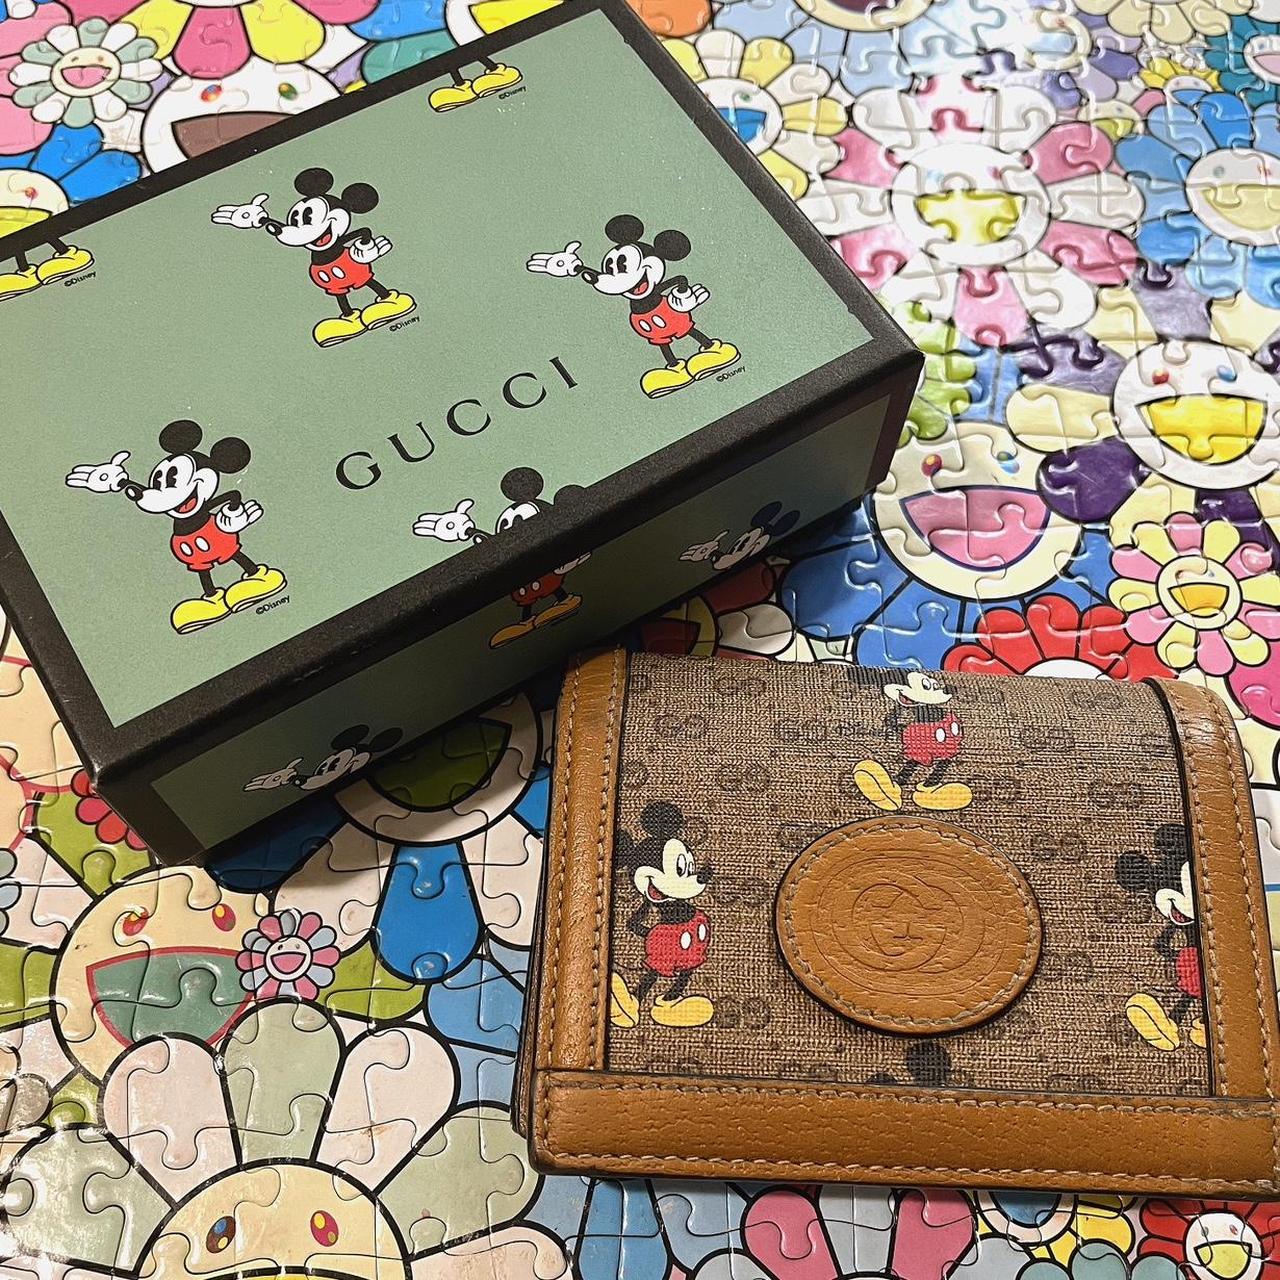 Gucci x Disney collab. Resort 2020 collection.